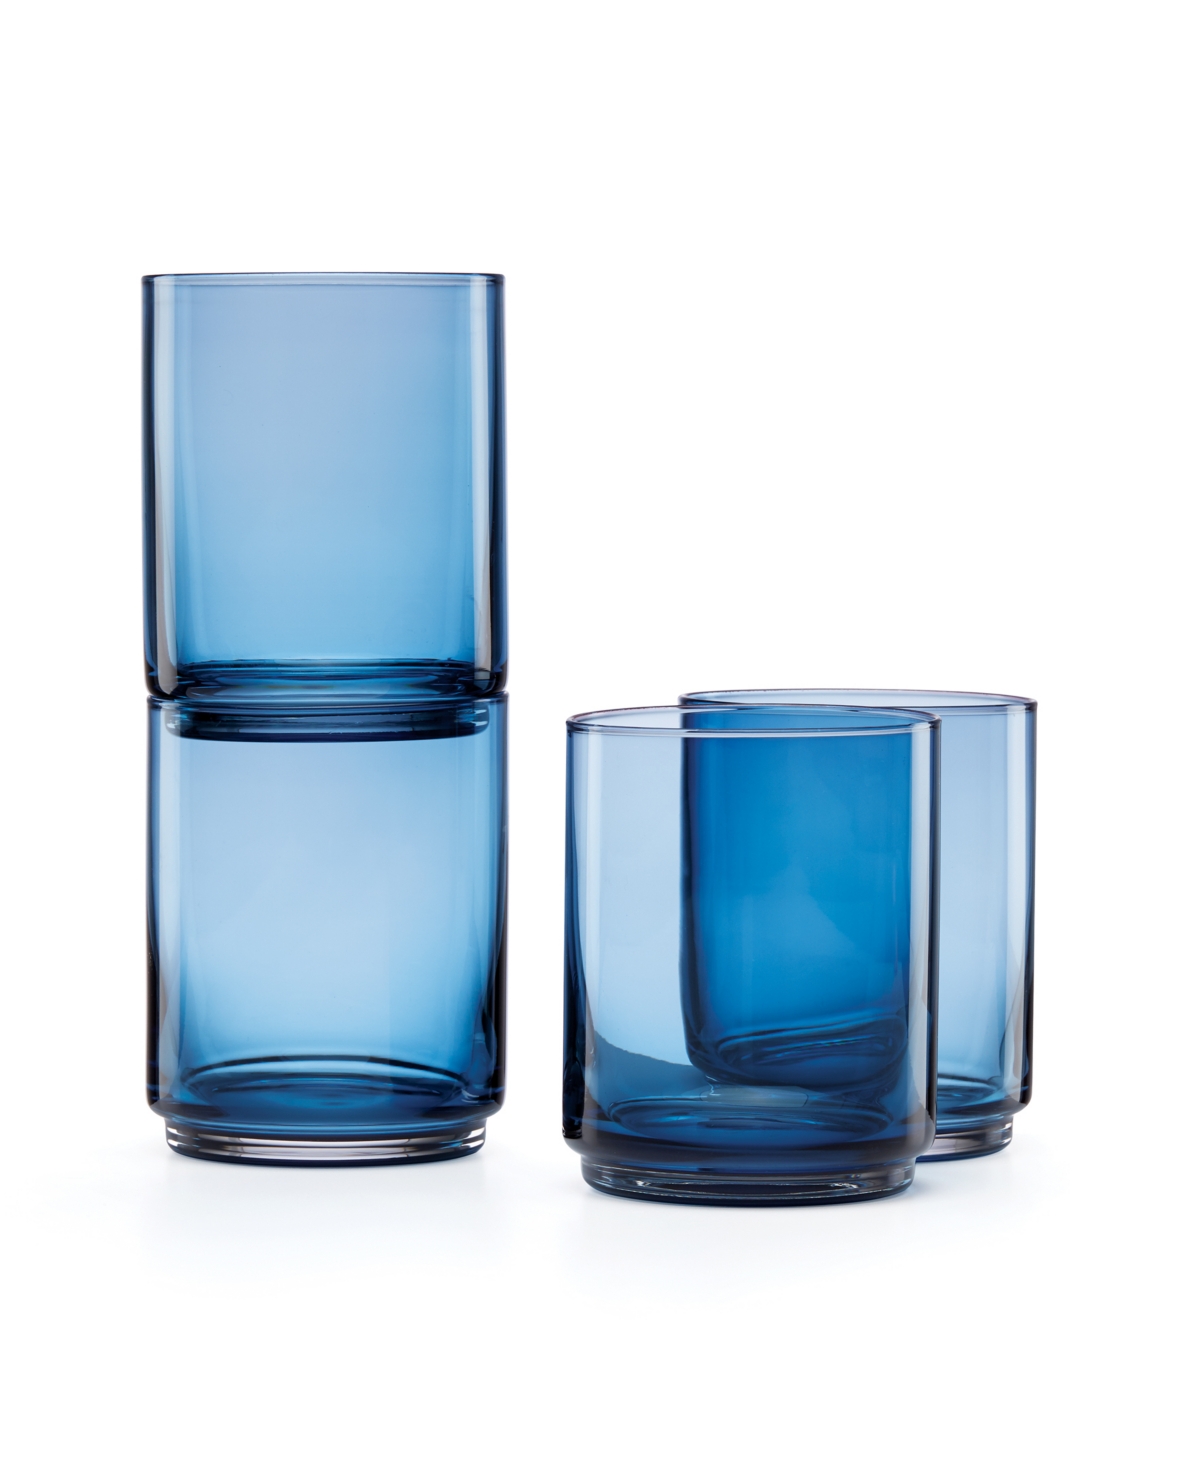 Lenox Tuscany Classics Stackable Tall Glasses Set, 4 Piece In Blue